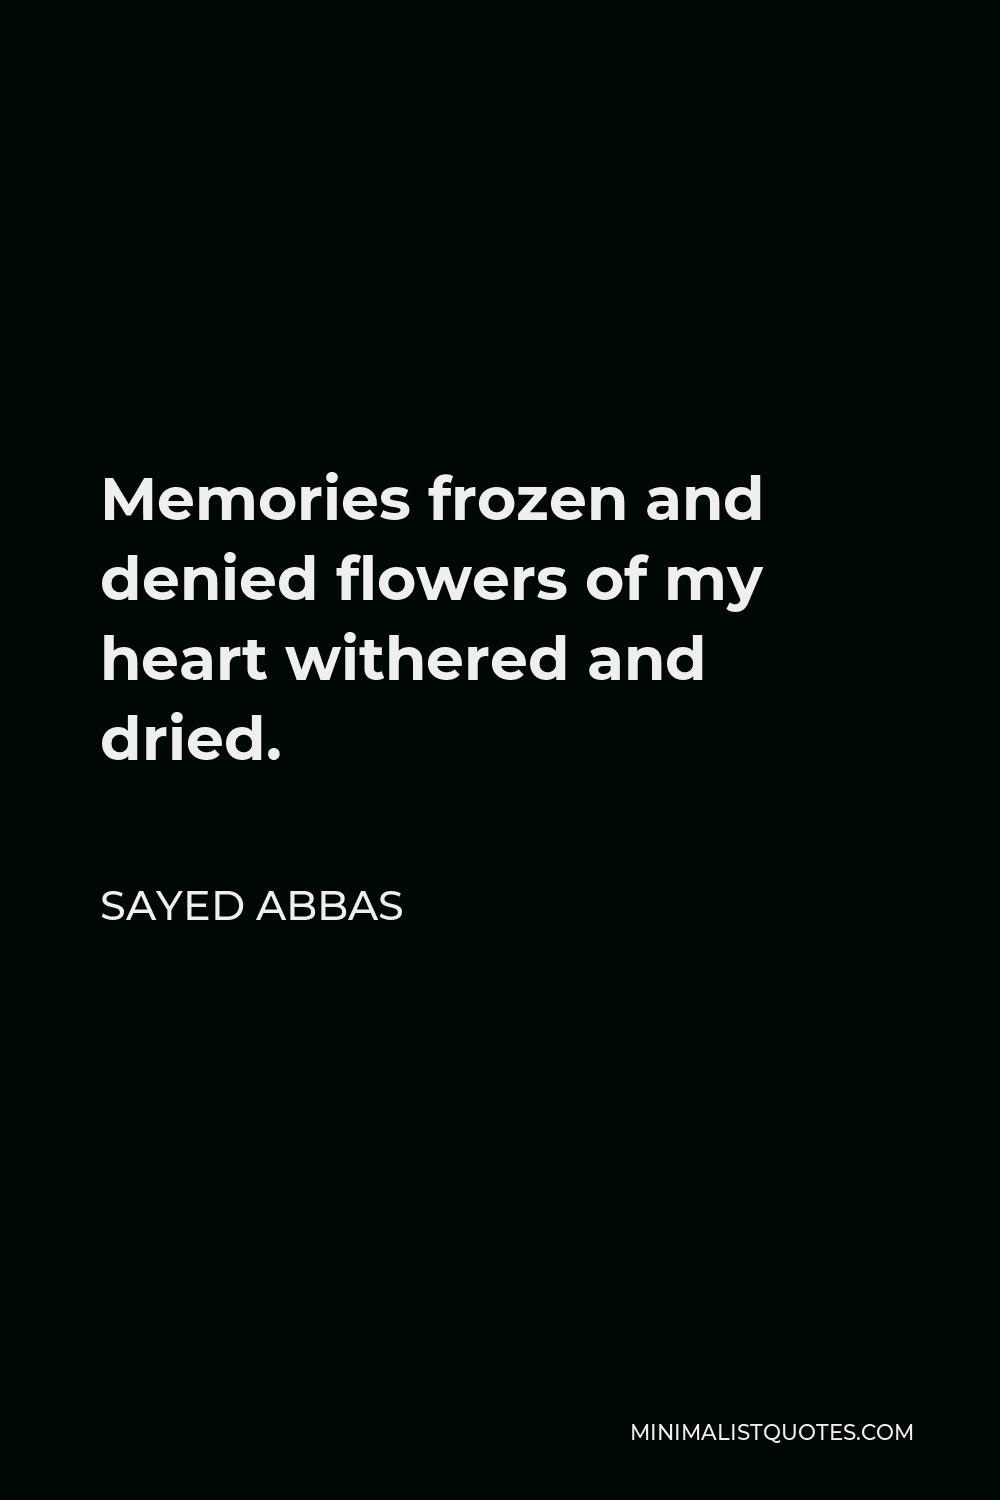 Sayed Abbas Quote - Memories frozen and denied flowers of my heart withered and dried.